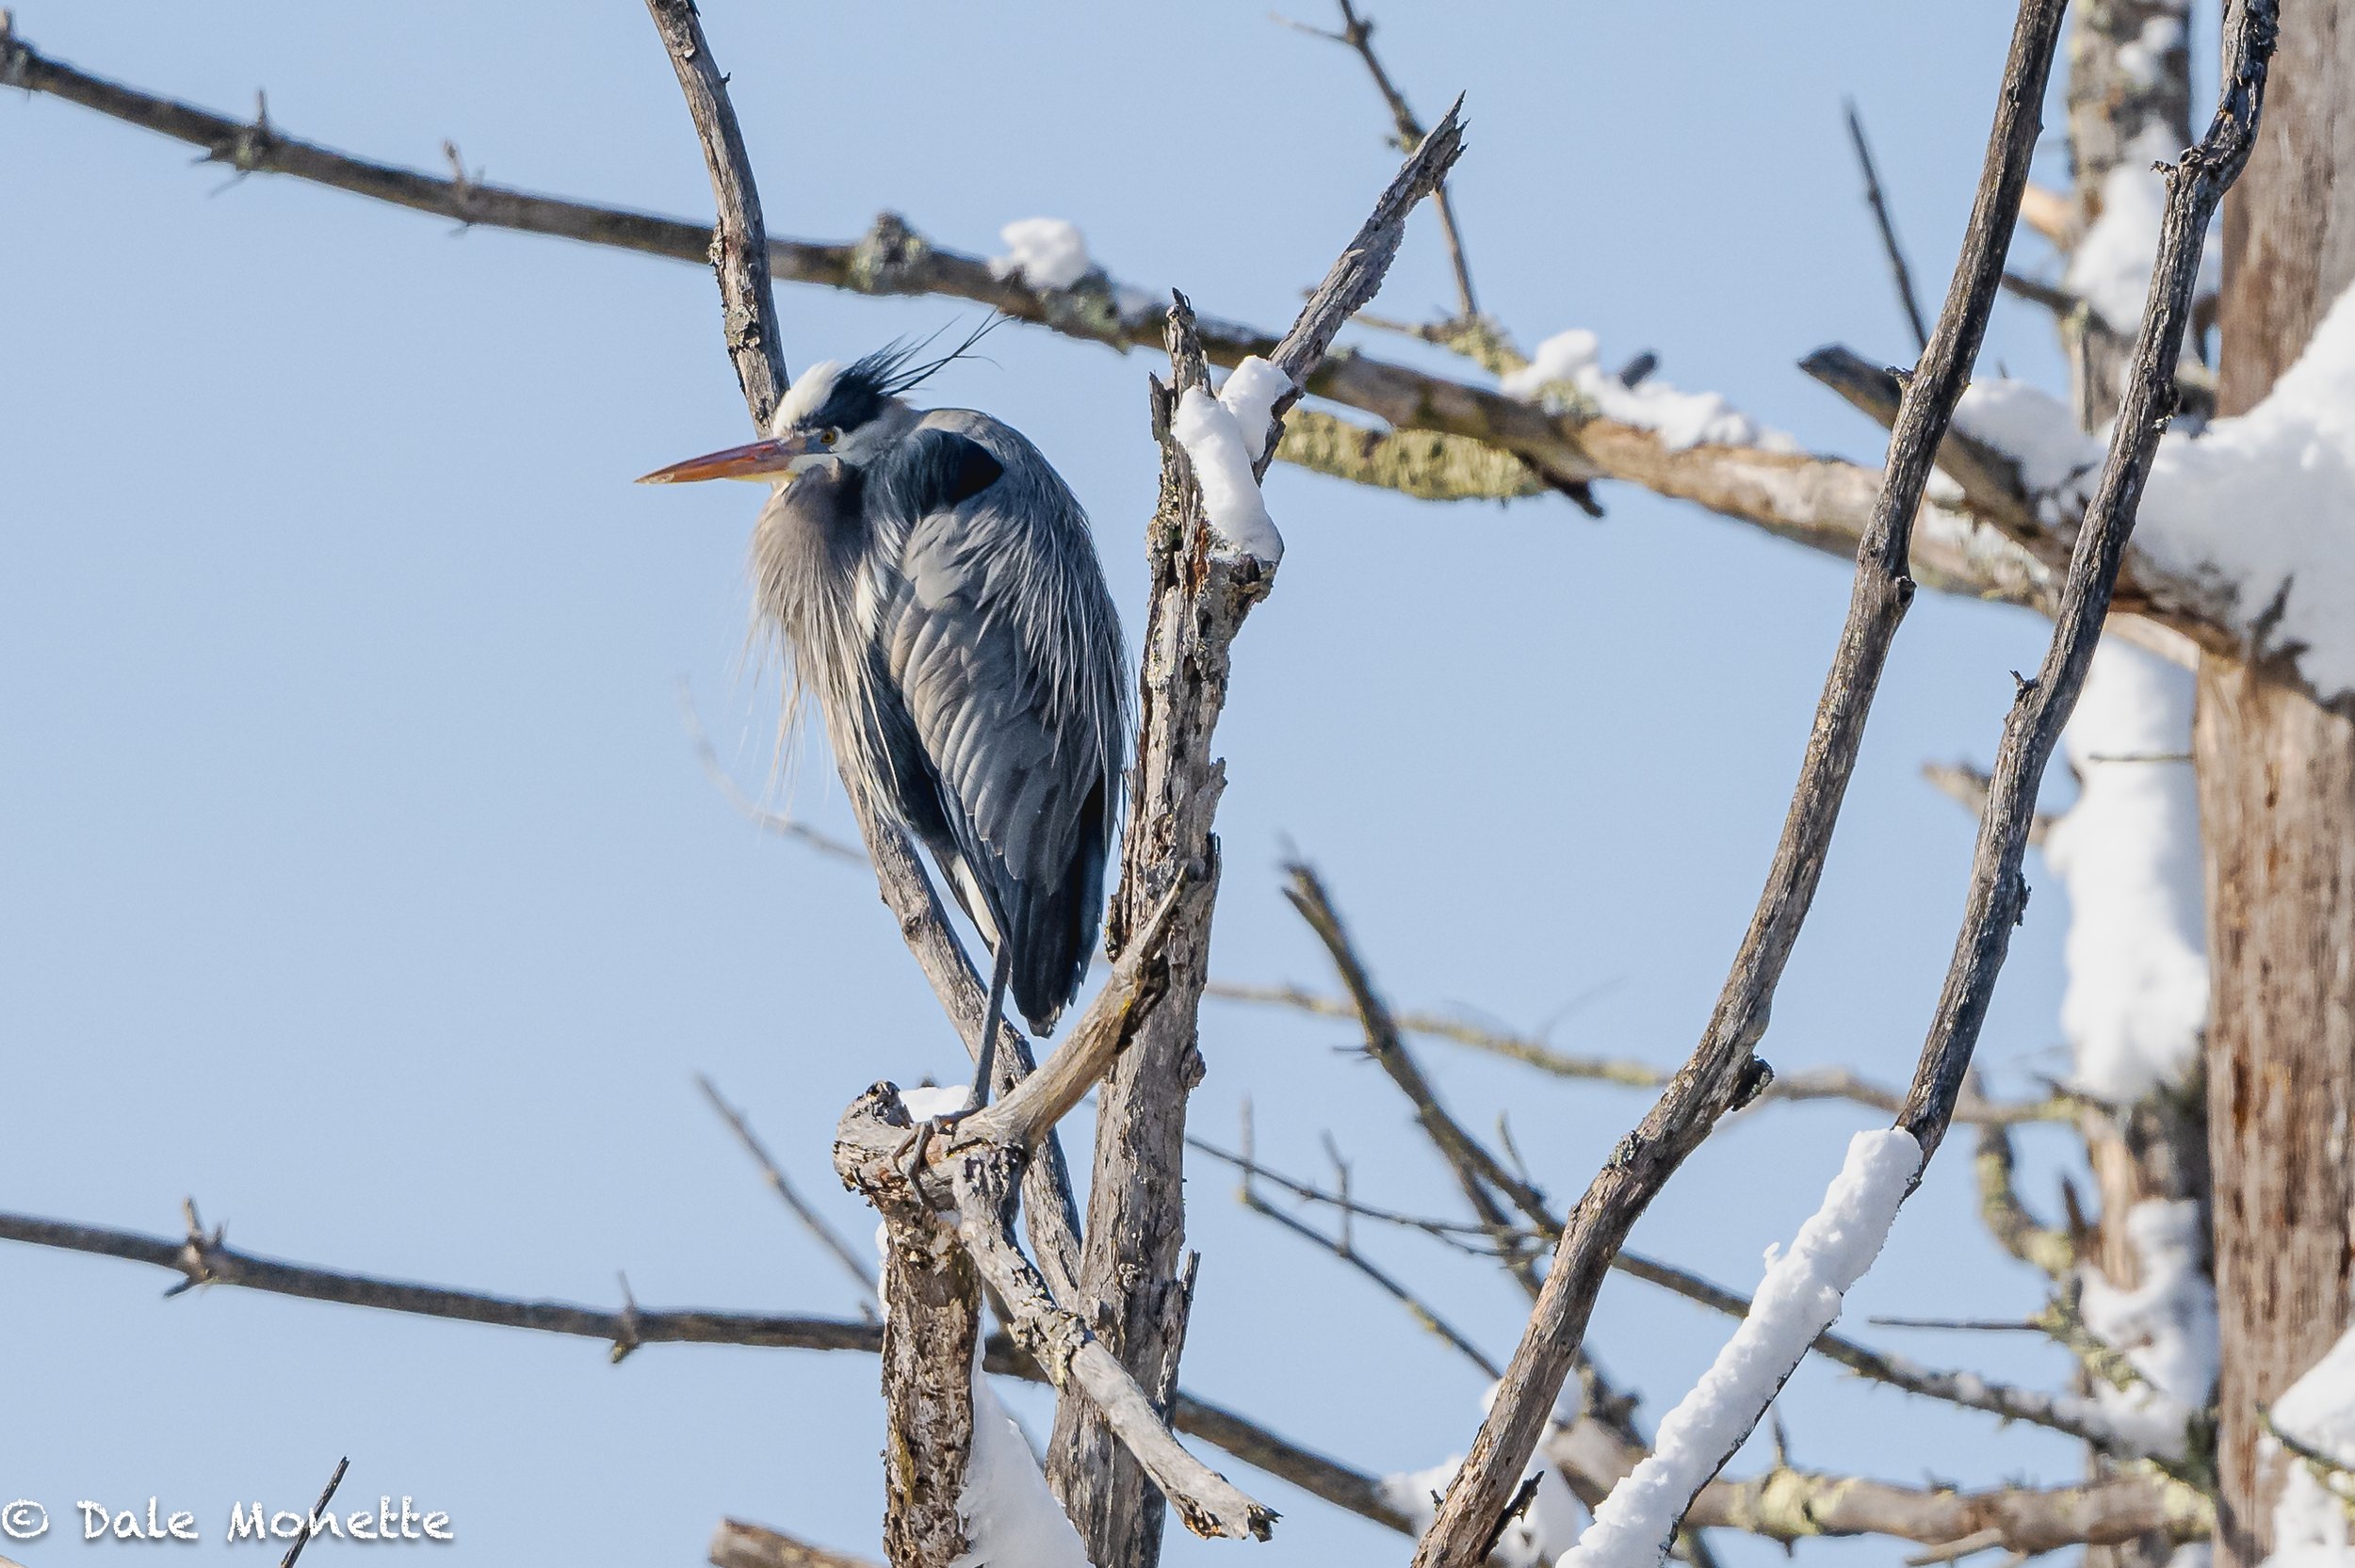   Great blue herons are slowly coming back to their heronries…. this is the first one I have seen this year and it had another one with it.  